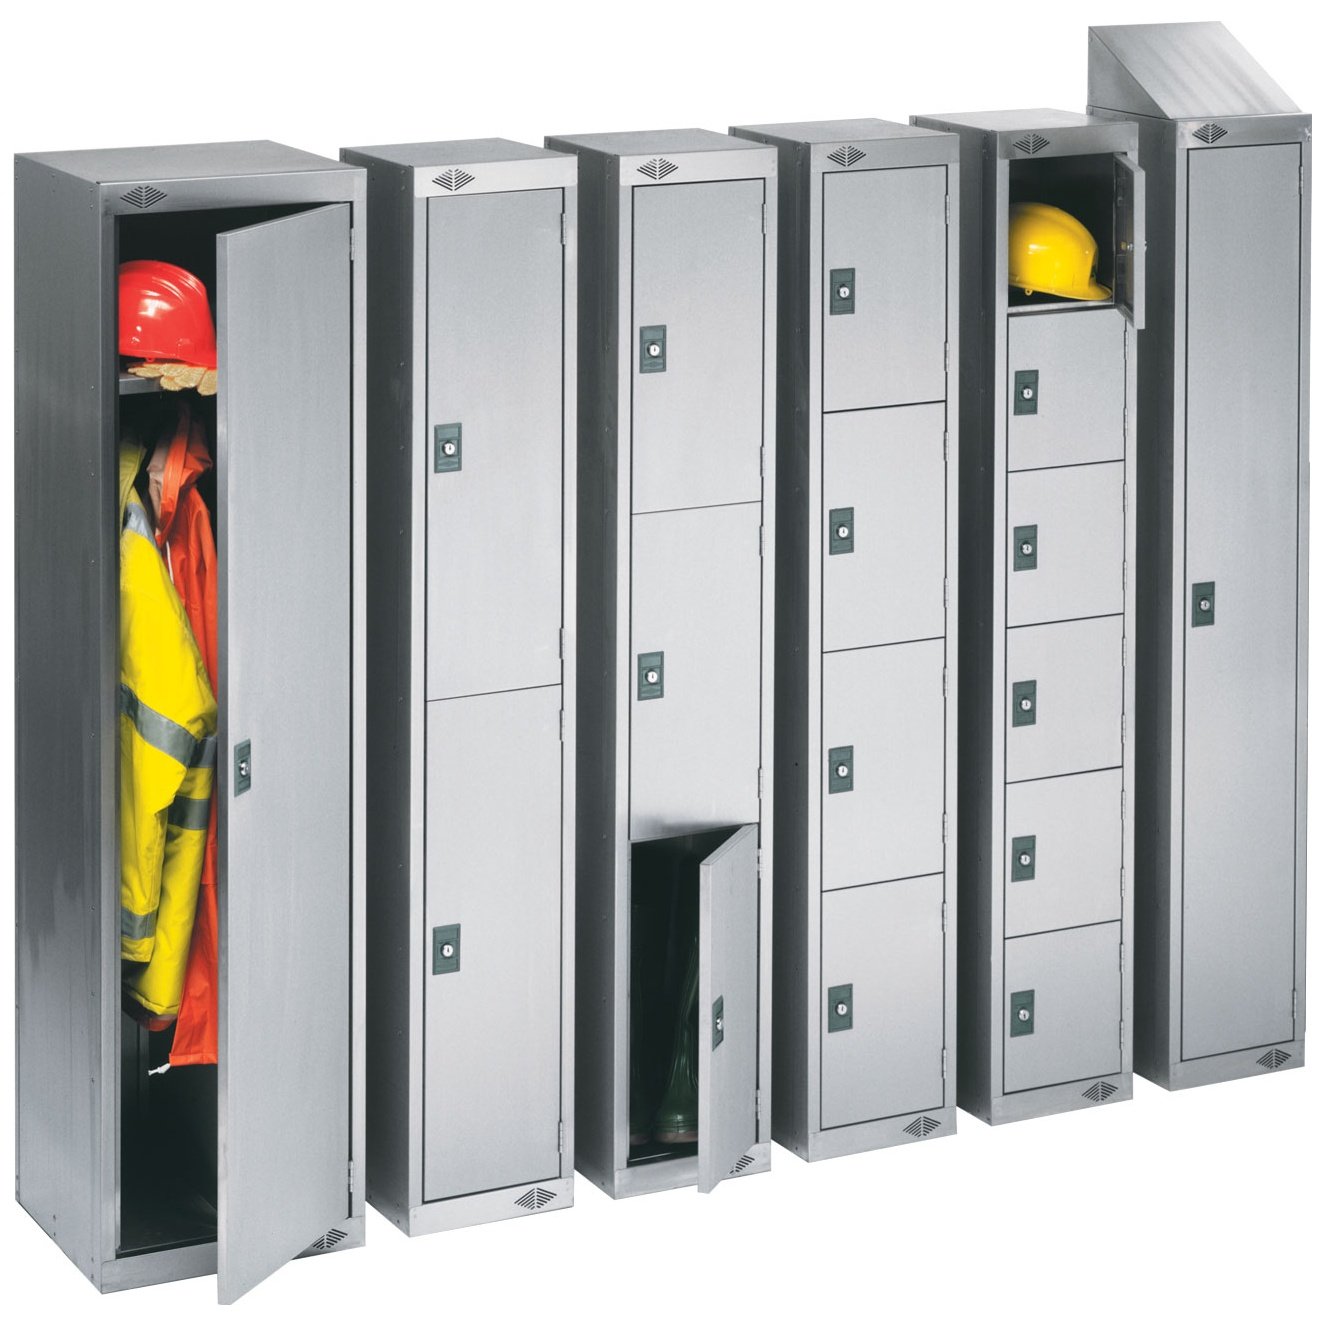 Stainless Steel Compartment Lockers | Stainless Steel Lockers